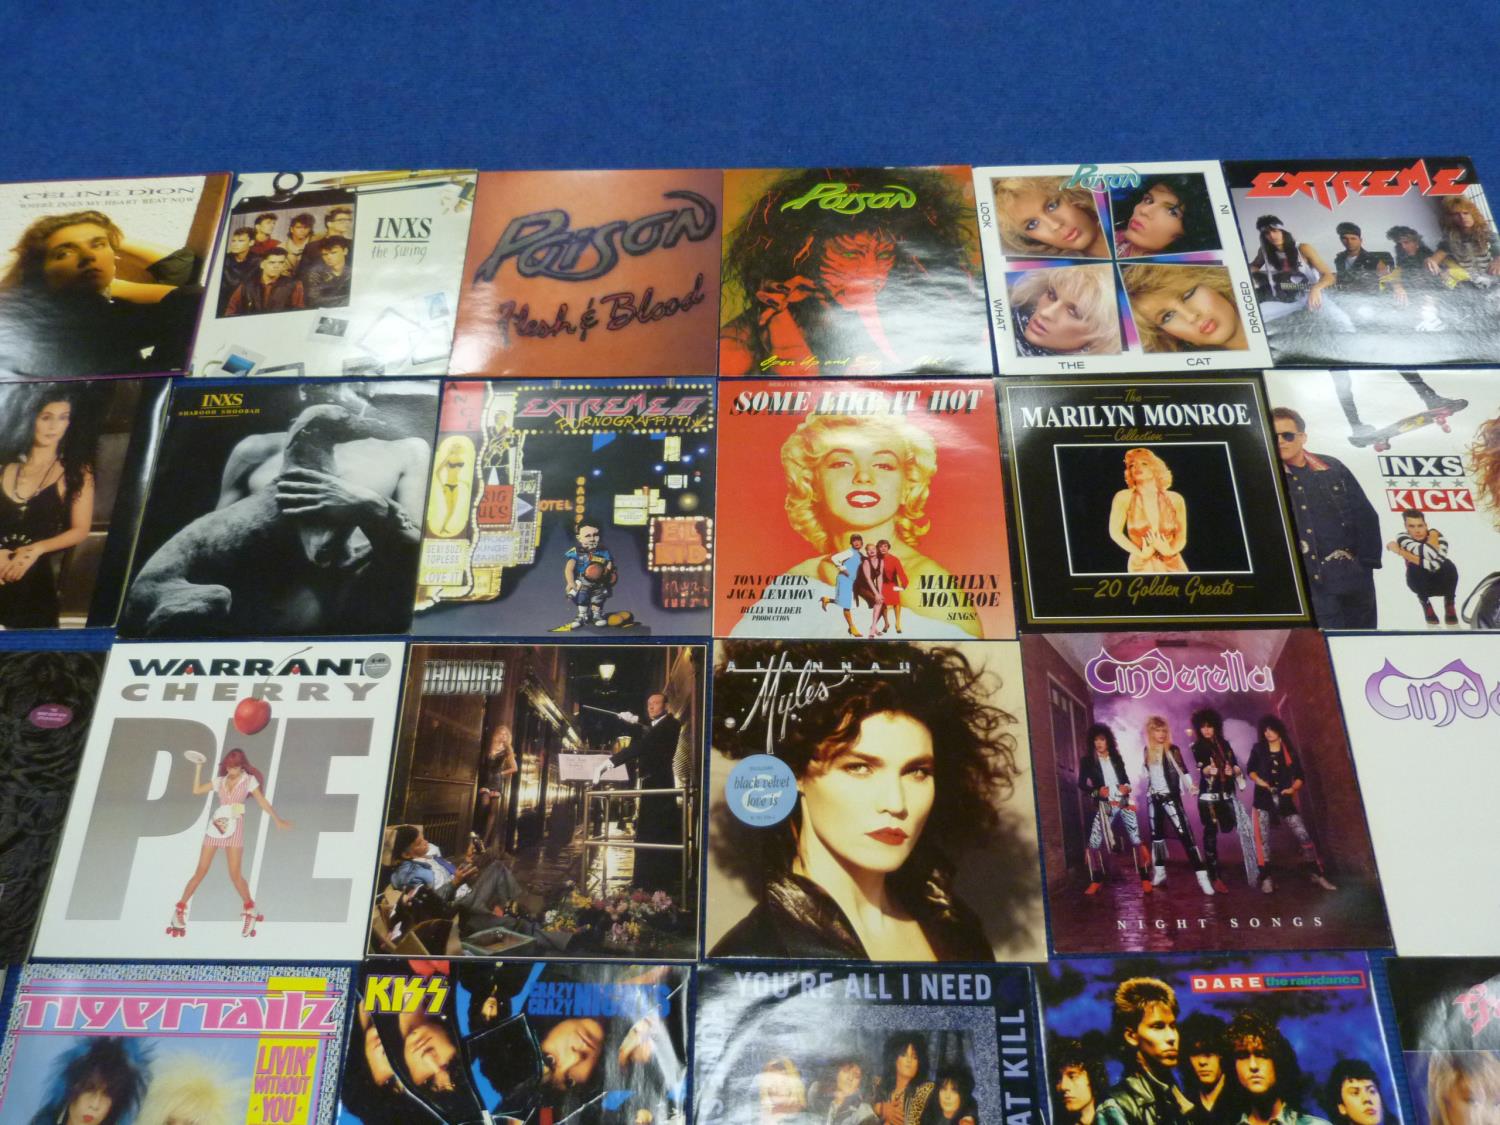 Quantity of Rock LP's to include Poison INXS and Cinderella. Also 45rpm records and two Marilyn - Image 8 of 12